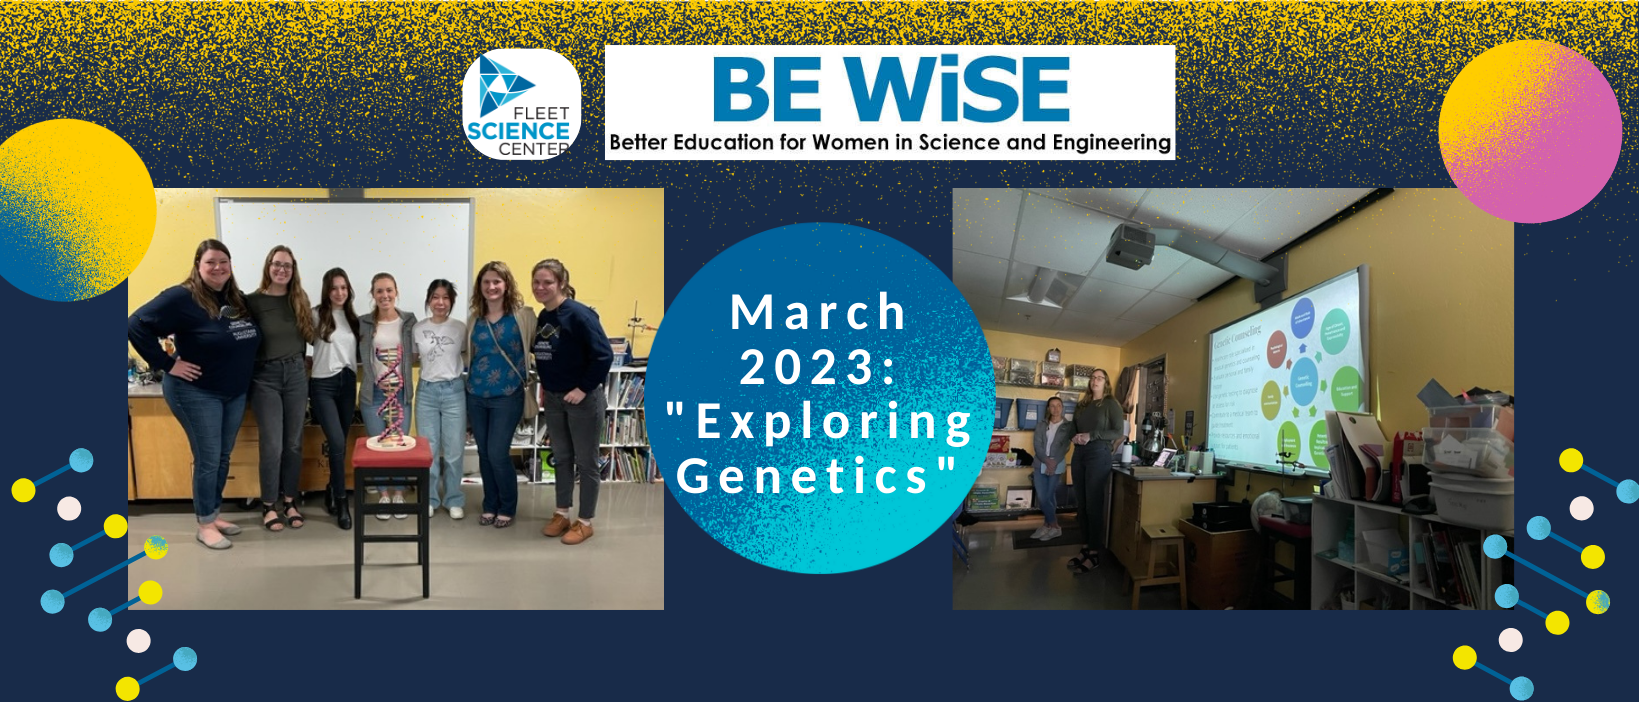 3 of 5, The Fleet Science Center logo appears next to the BE WiSE (Better Education for Women in Science and Engineering) logo at the top of the image. A picture on the left shows Taylor Berninger standing with the genetic counseling graduate students who presented the session. A picture on the right show two presenters in front of a screen giving their presentation. In the center of the image is a circle with the words "March 2023: Exploring Genetics"